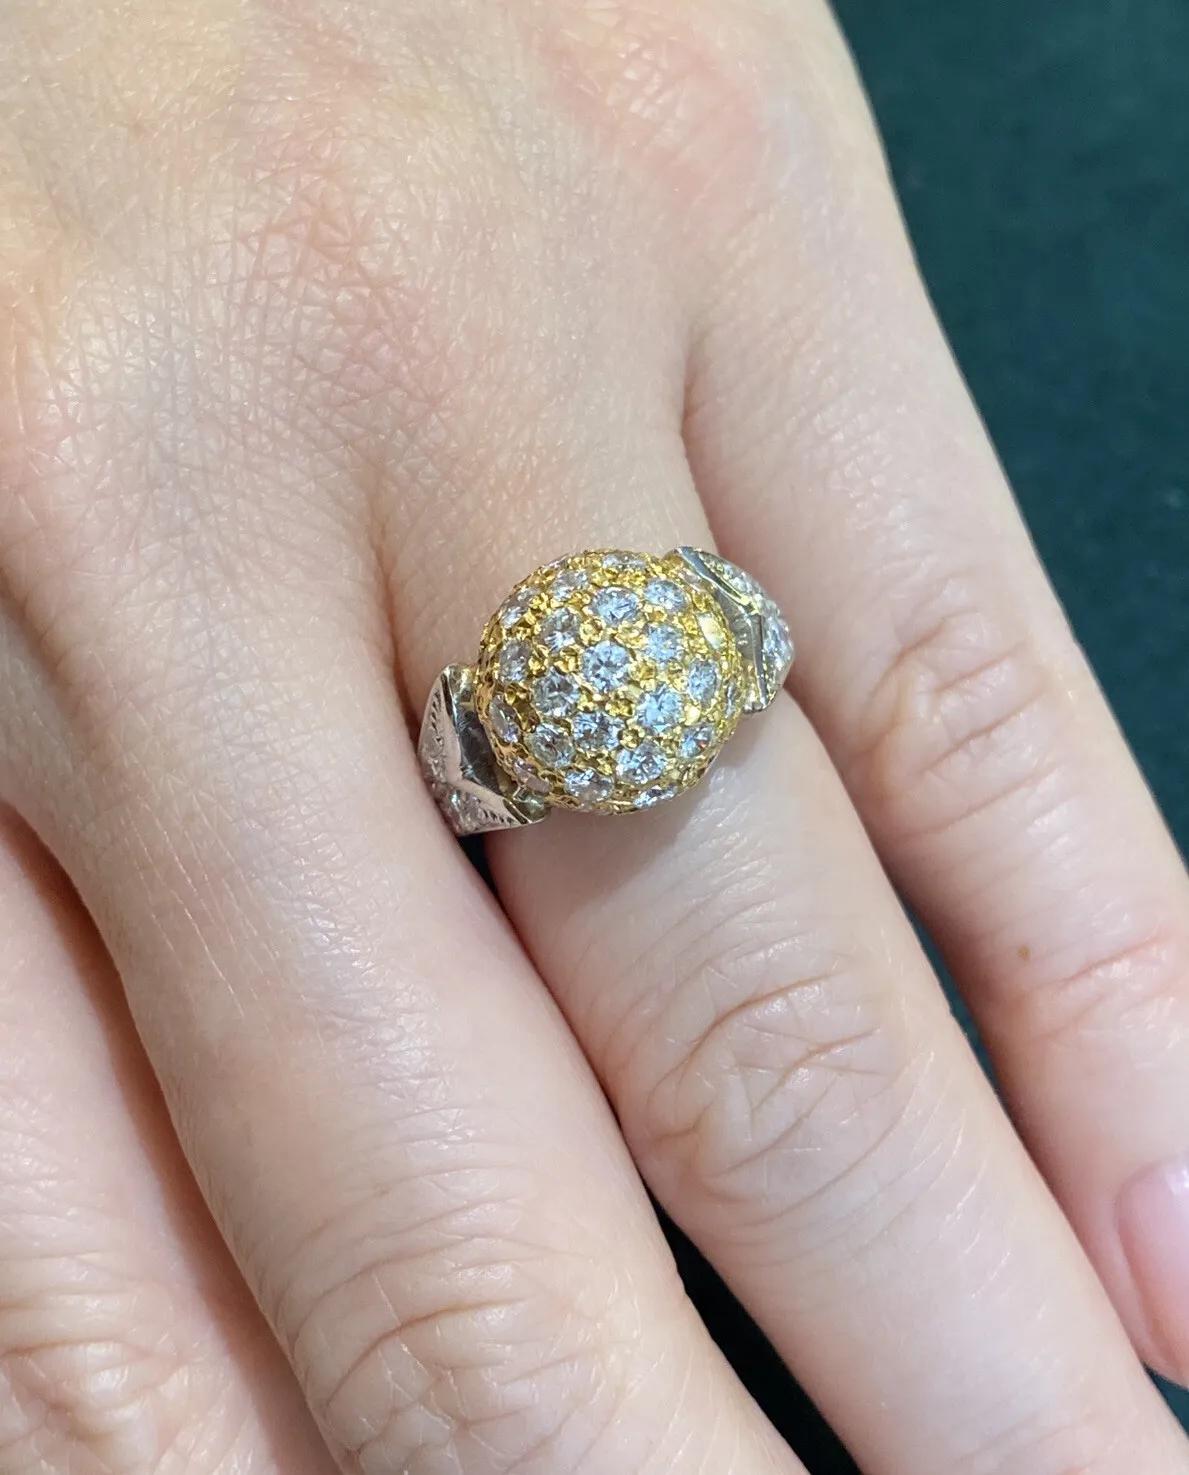 Diamond Pave Ball Ring

Diamond Pave Ball Ring features an 18k Yellow Gold Ball covered entirely by 2.00 carats of Round Brilliant Diamonds with a Platinum Shank which is covered in Diamonds half way down the Ring.

Total Diamond weight is